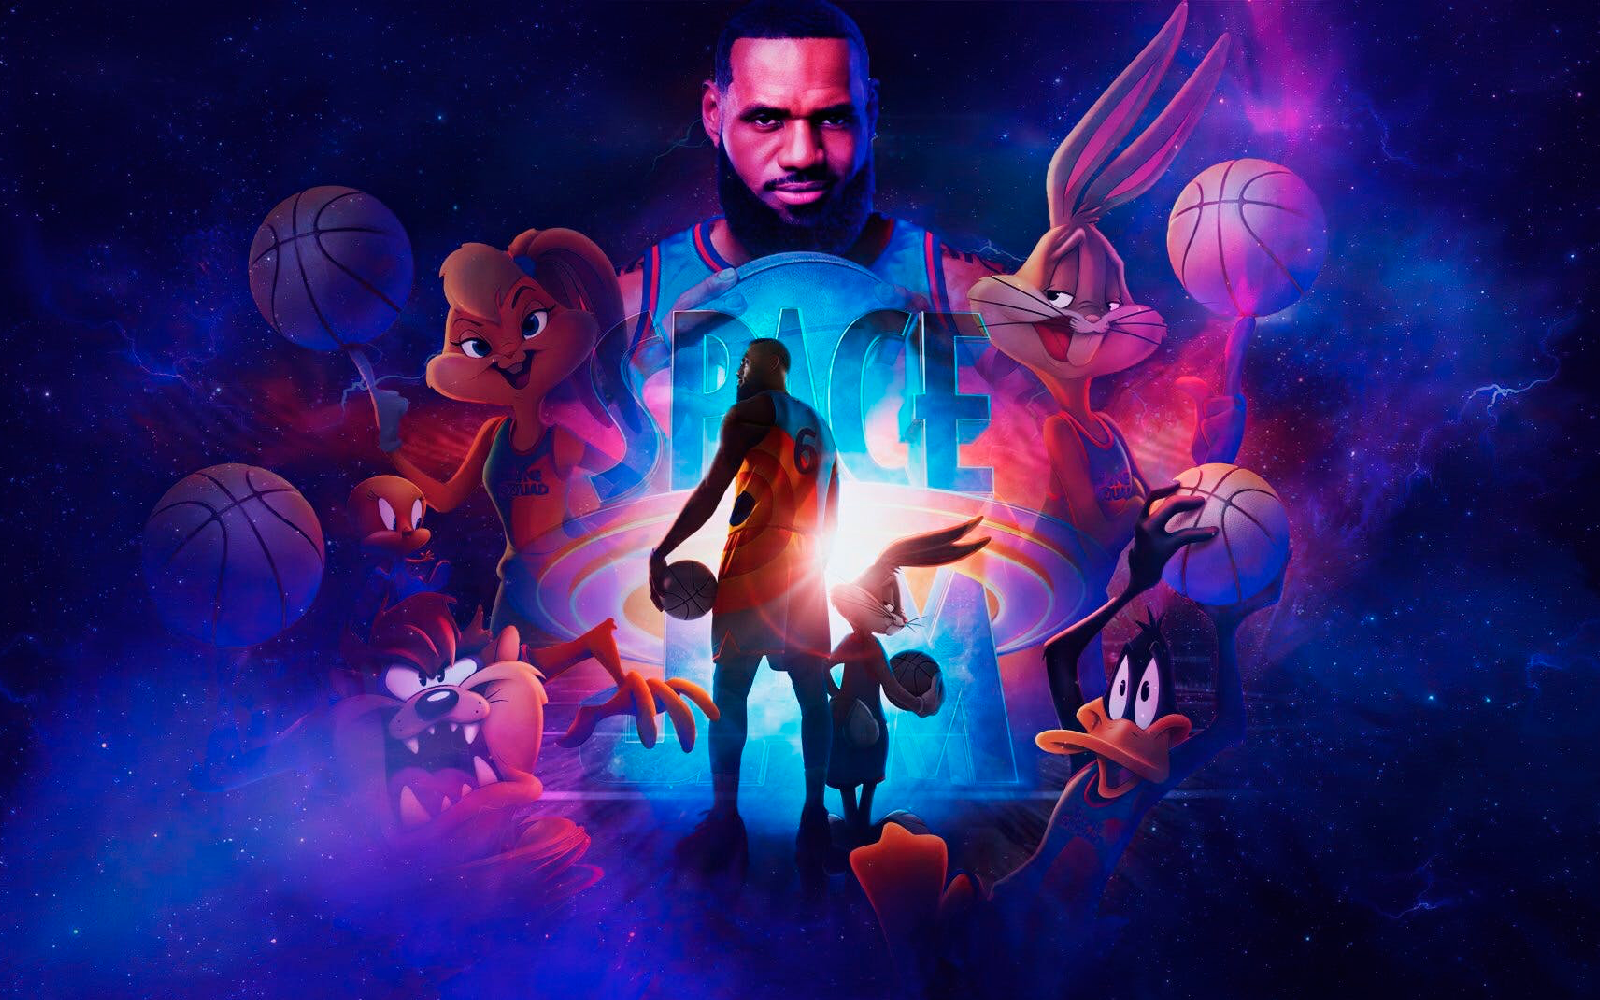 Space Jam: A New Legacy is already considered a disaster